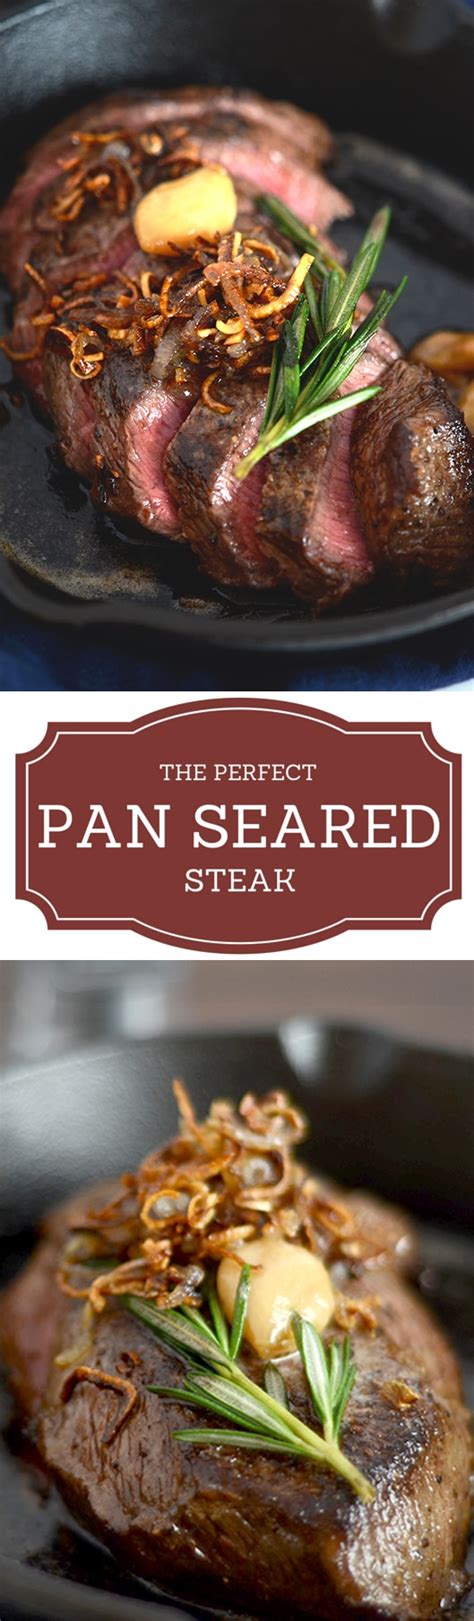 Chuck steak is so good when cooked right. Flat Iron Pan Seared Steak Recipe | I'd Rather Be A Chef